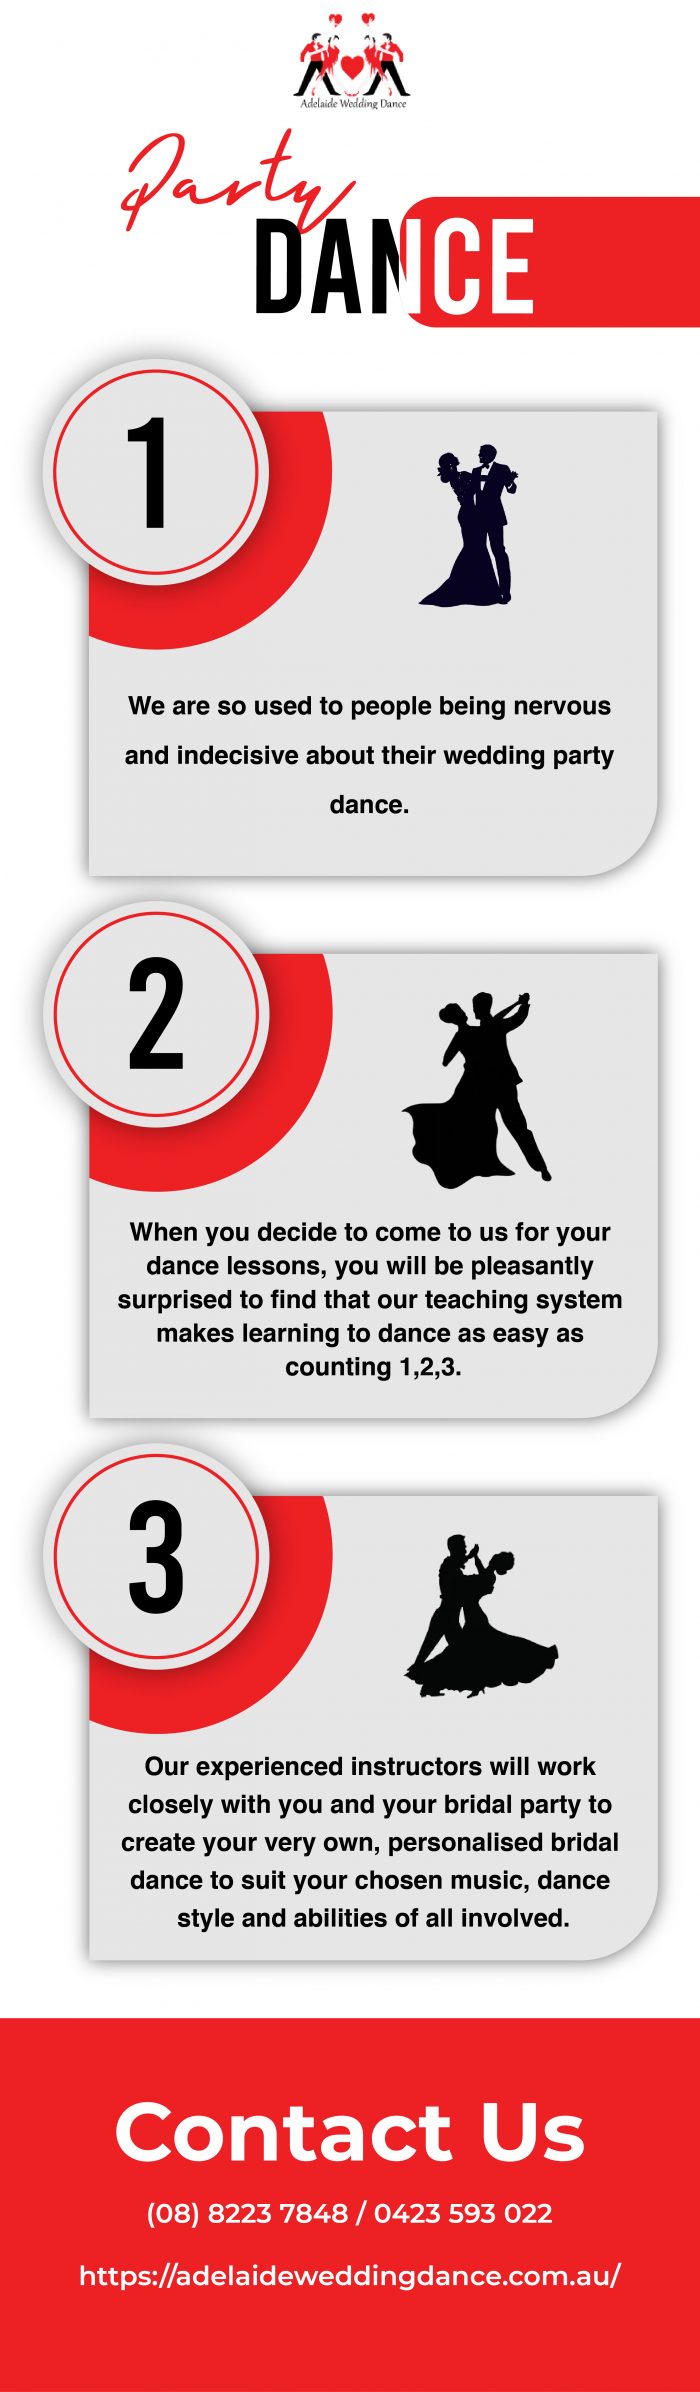 Best Party Dance Lessons at Adelaide | Adelaide Wedding Dance